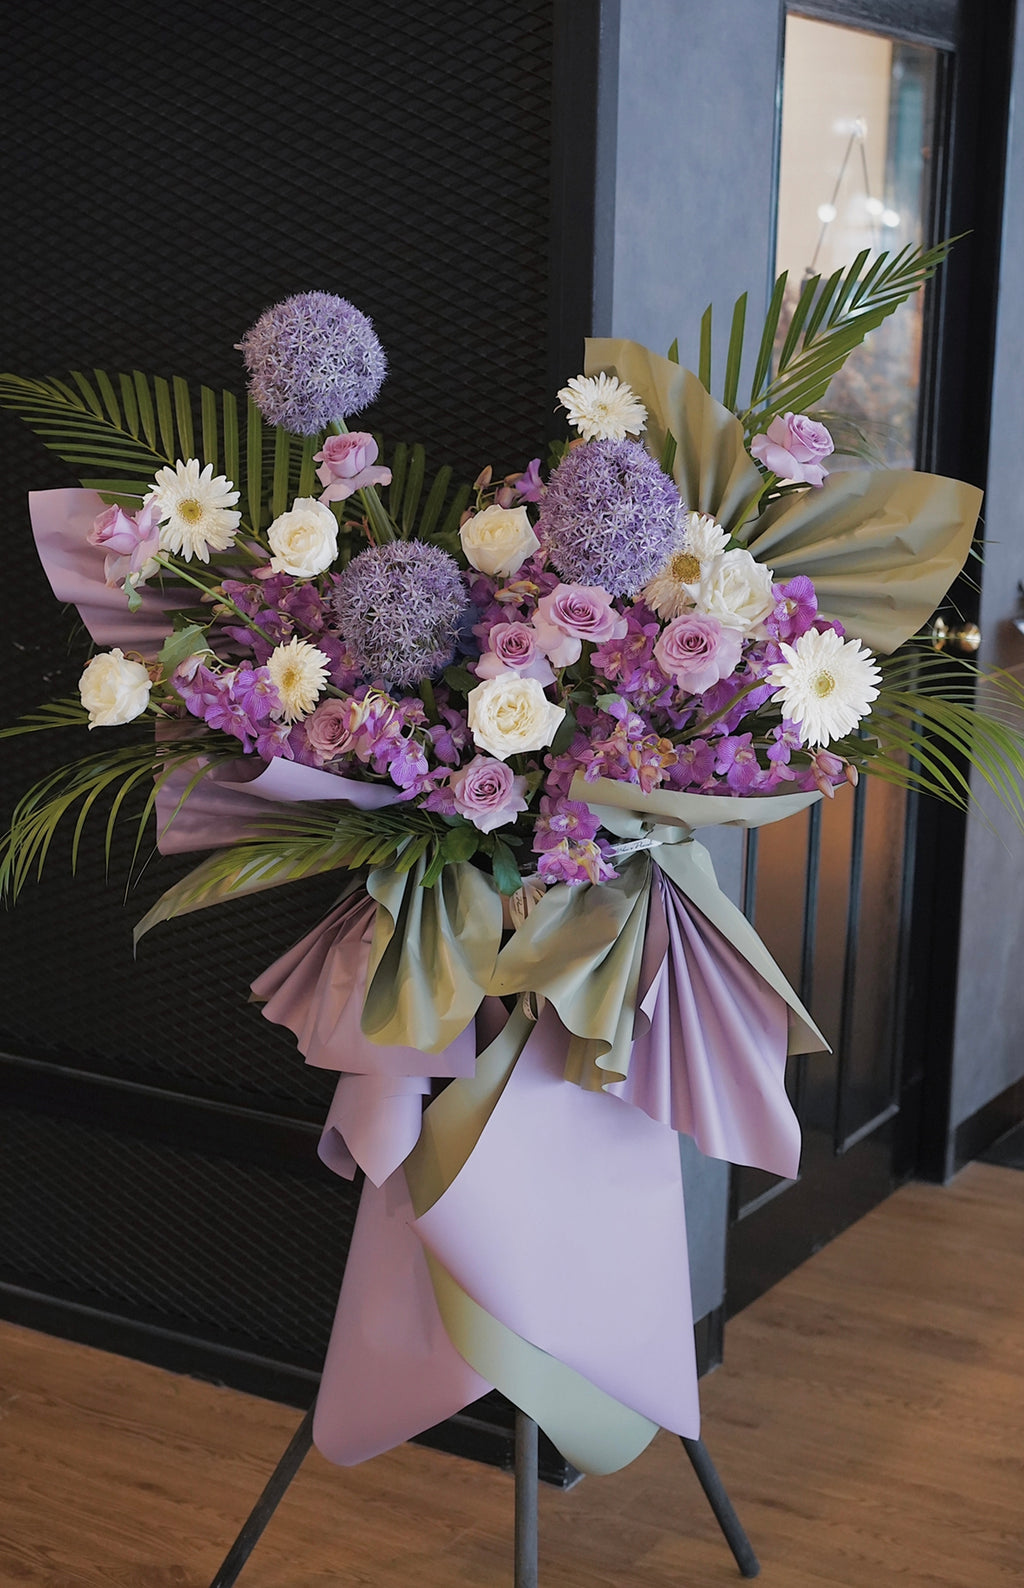 Grand opening flower stand - lilac/green